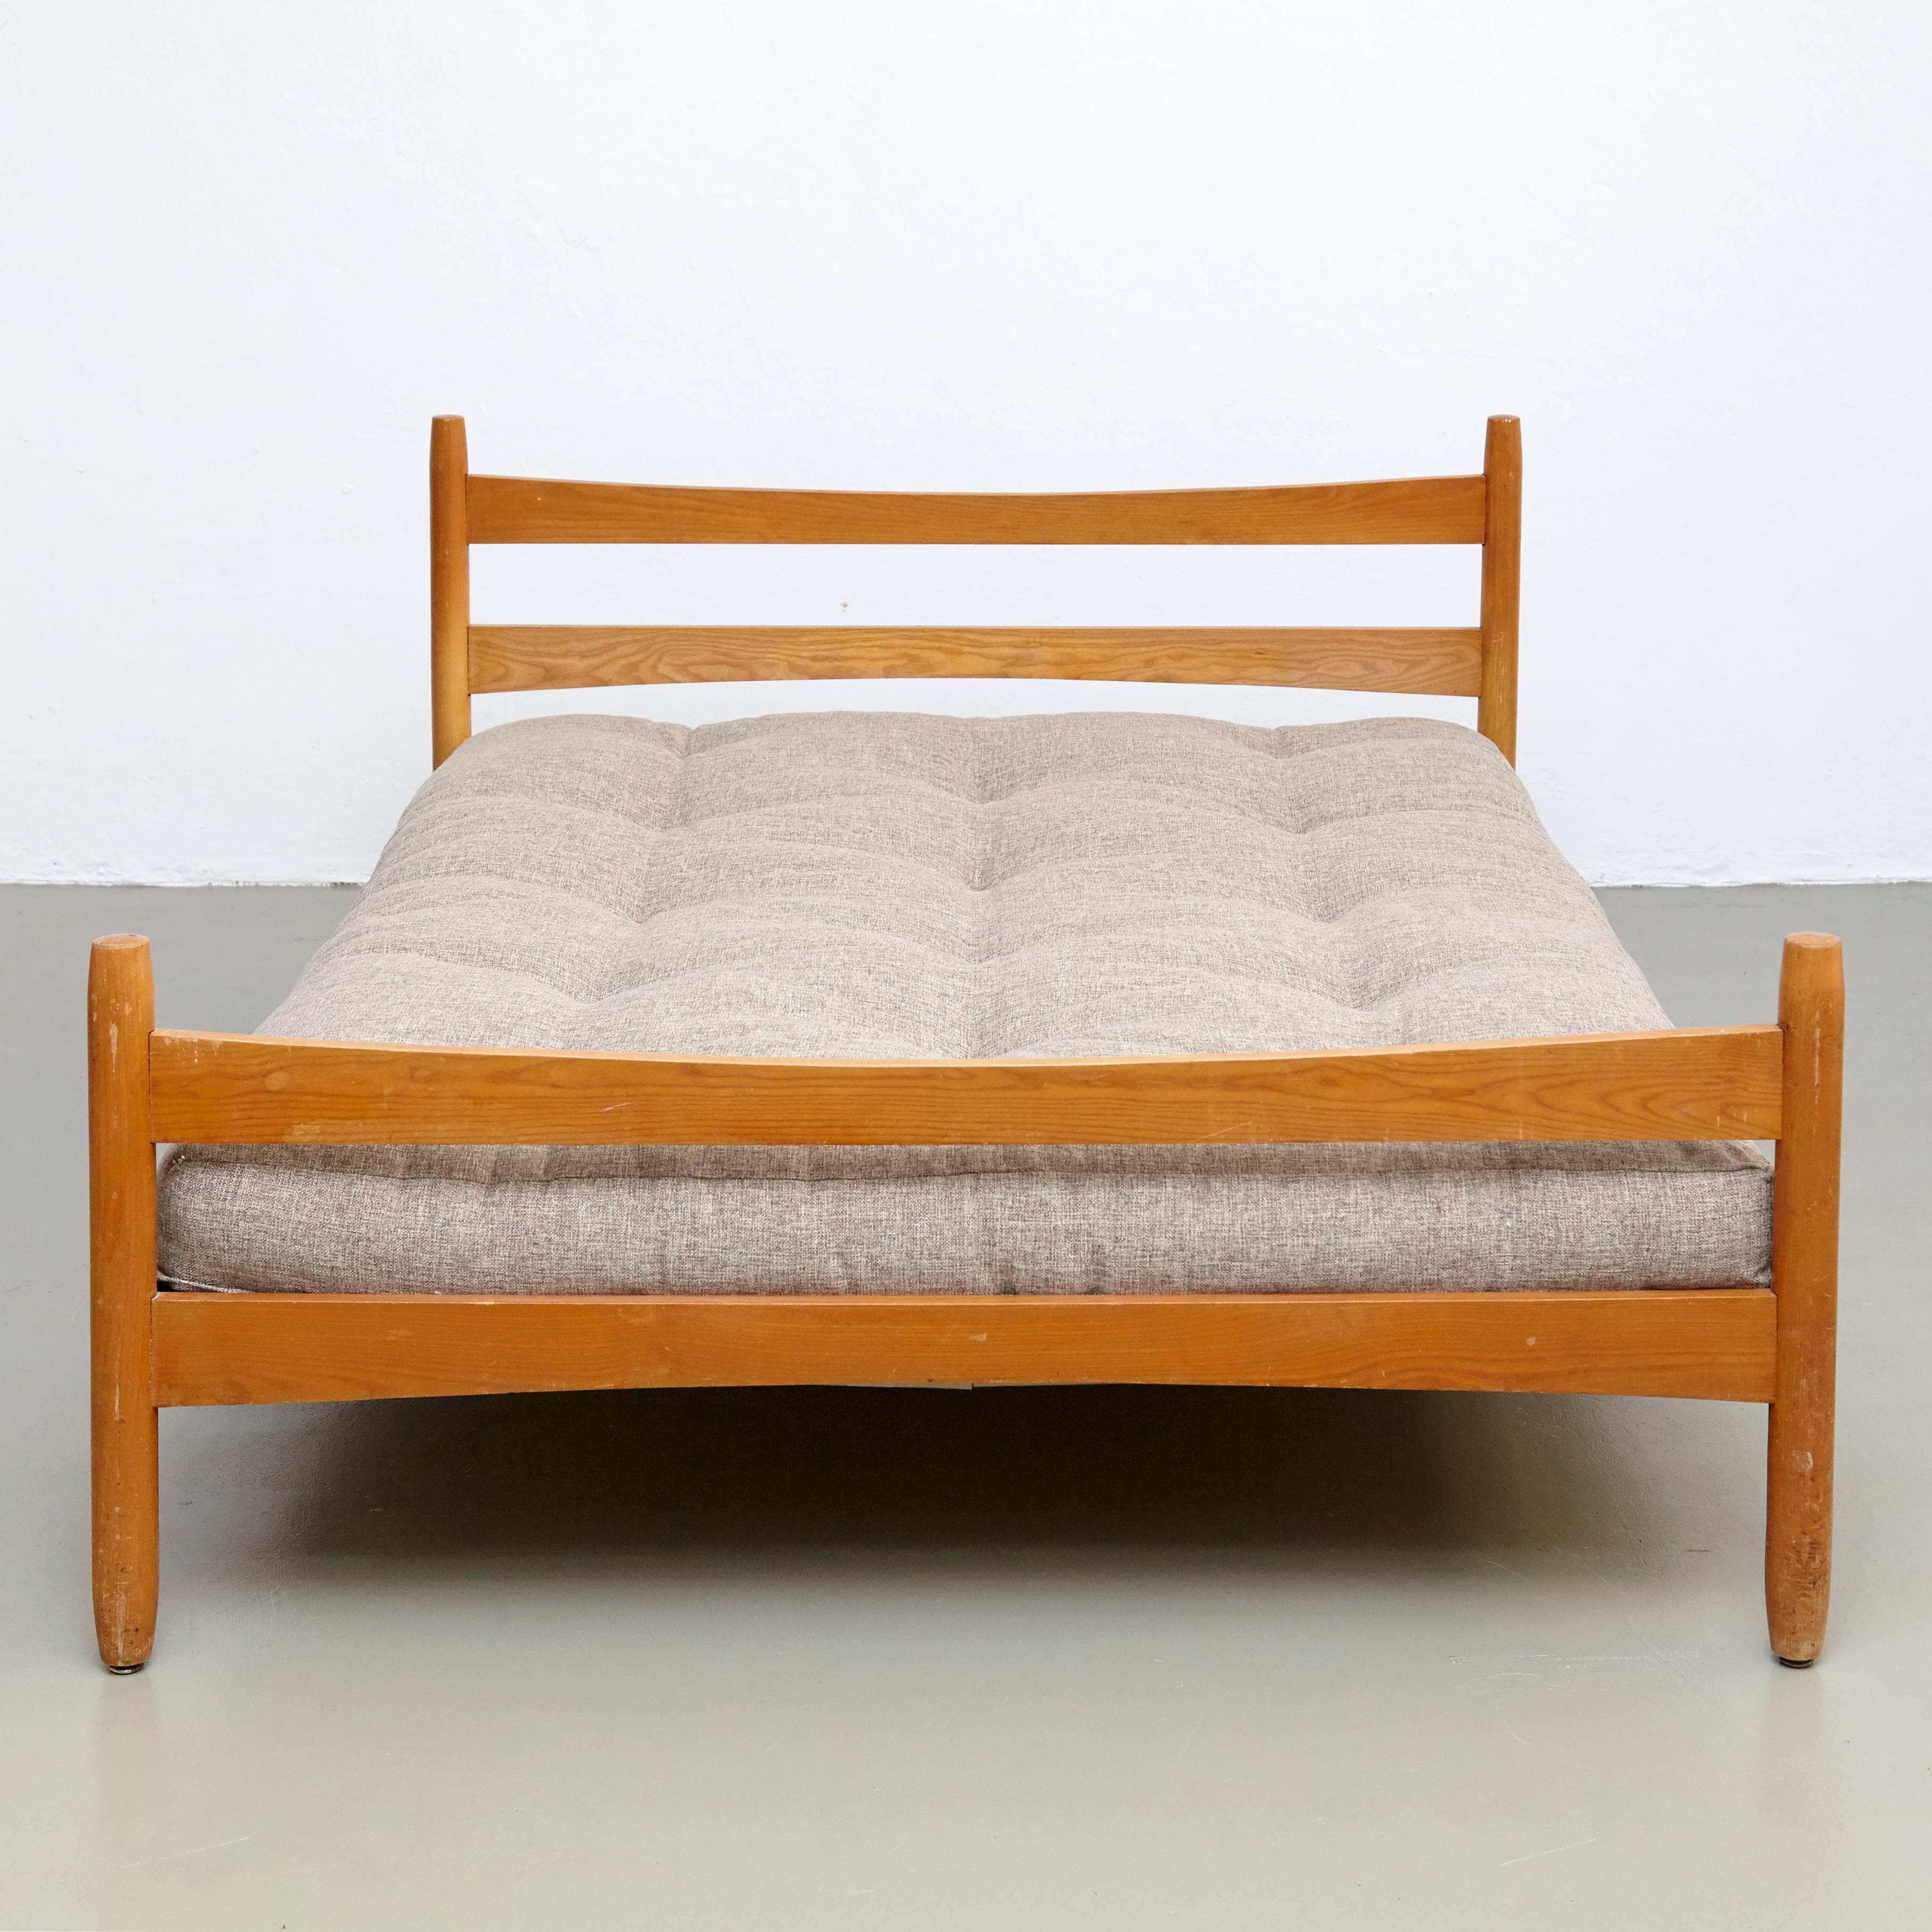 Bed designed by Charlotte Perriand for Meribel, circa 1960.
Manufactured in France.

Pinewood.

In good original condition, with minor wear consistent with age and use, preserving a beautiful patina.

Charlotte Perriand (1903-1999). She was